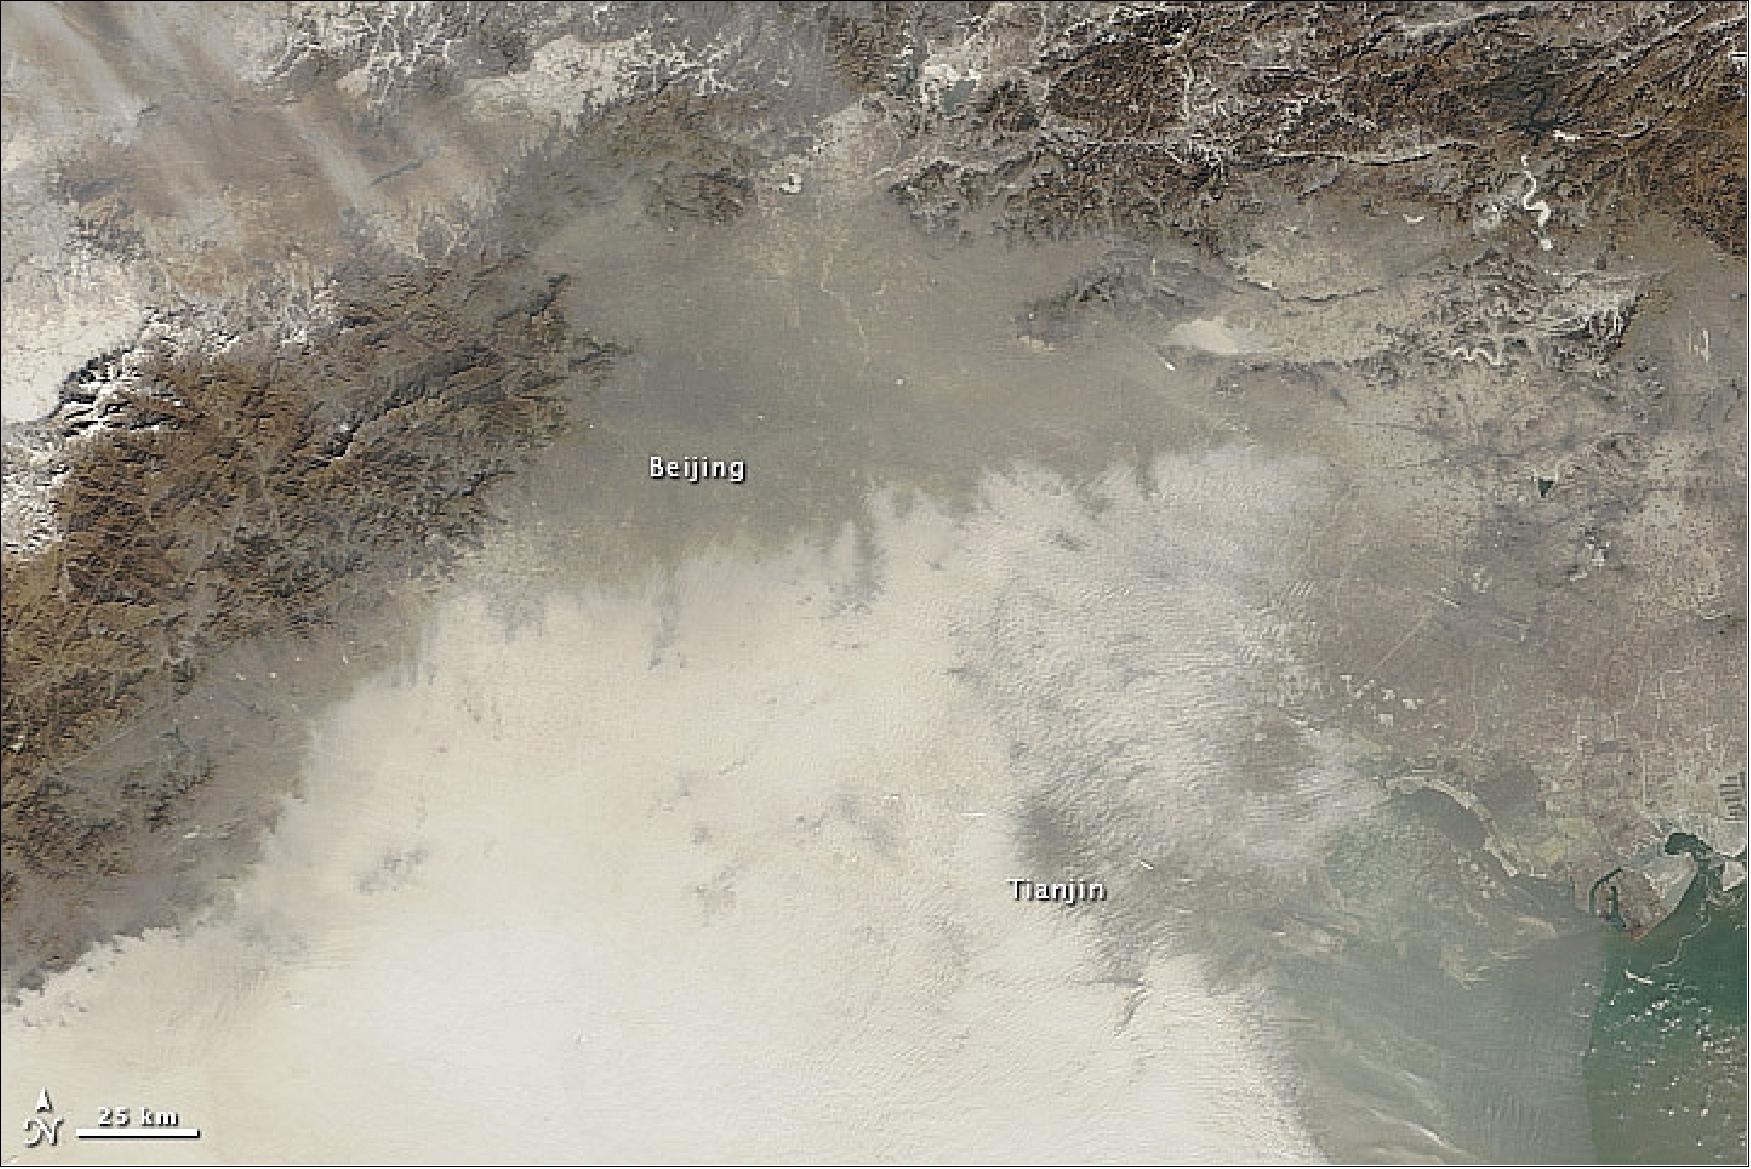 Figure 115: Air over Beijing China on January 14, 2013 as observed with the MODIS instrument (image credit: NASA, Jeff Schmaltz)